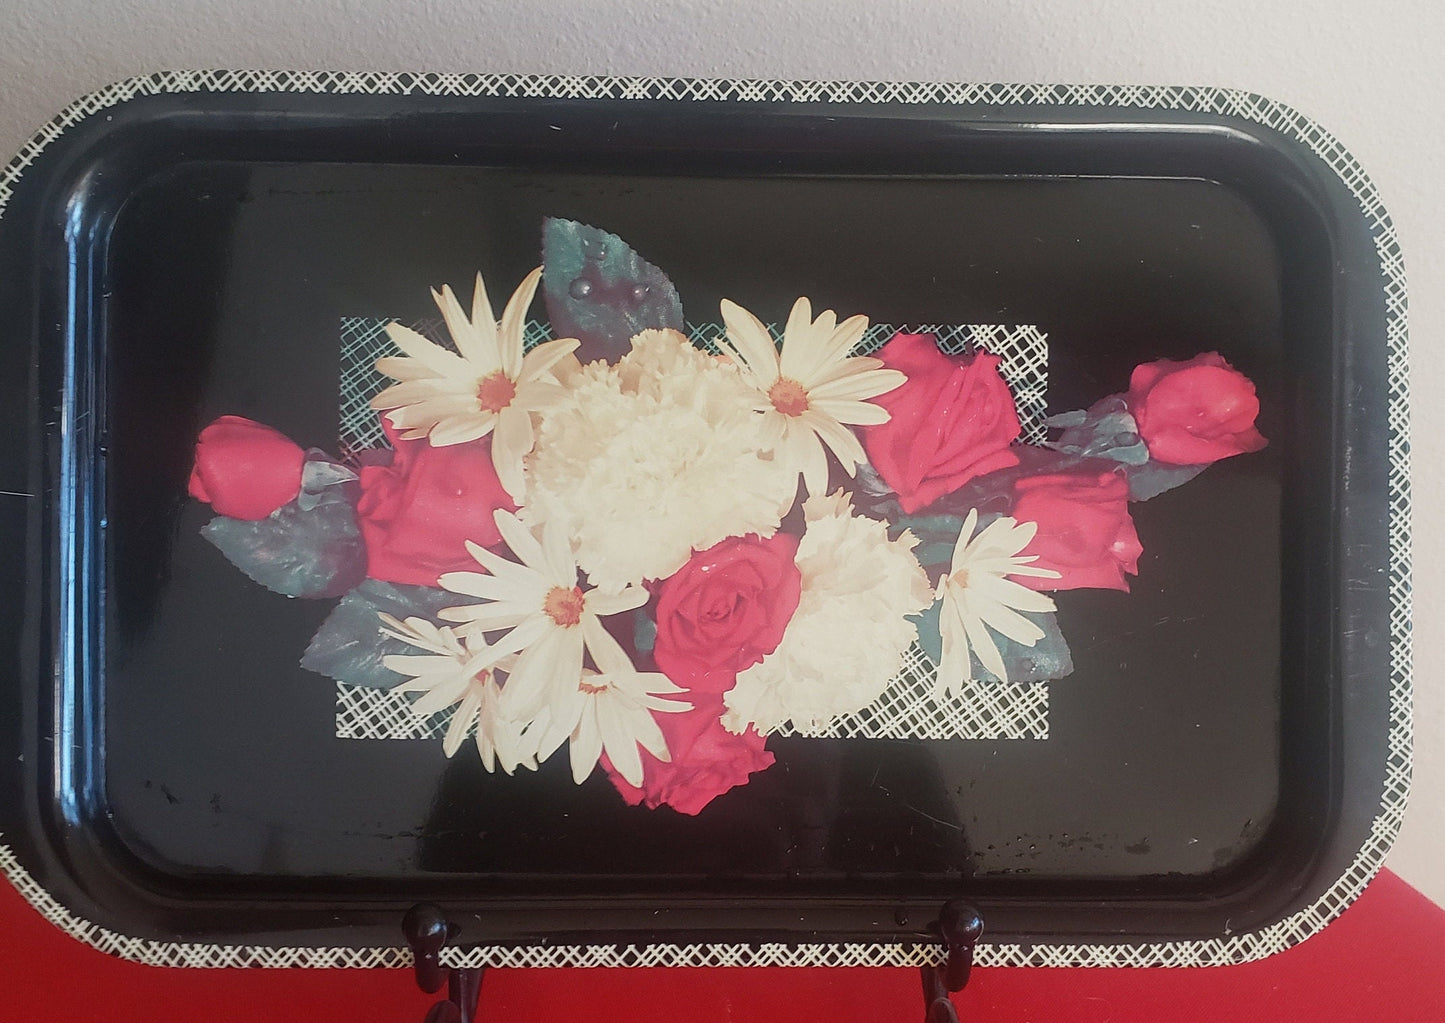 Vintage Metal Litho Lap/TV/Bed/Serving Tray Black with Carnations, Roses and Daisy's